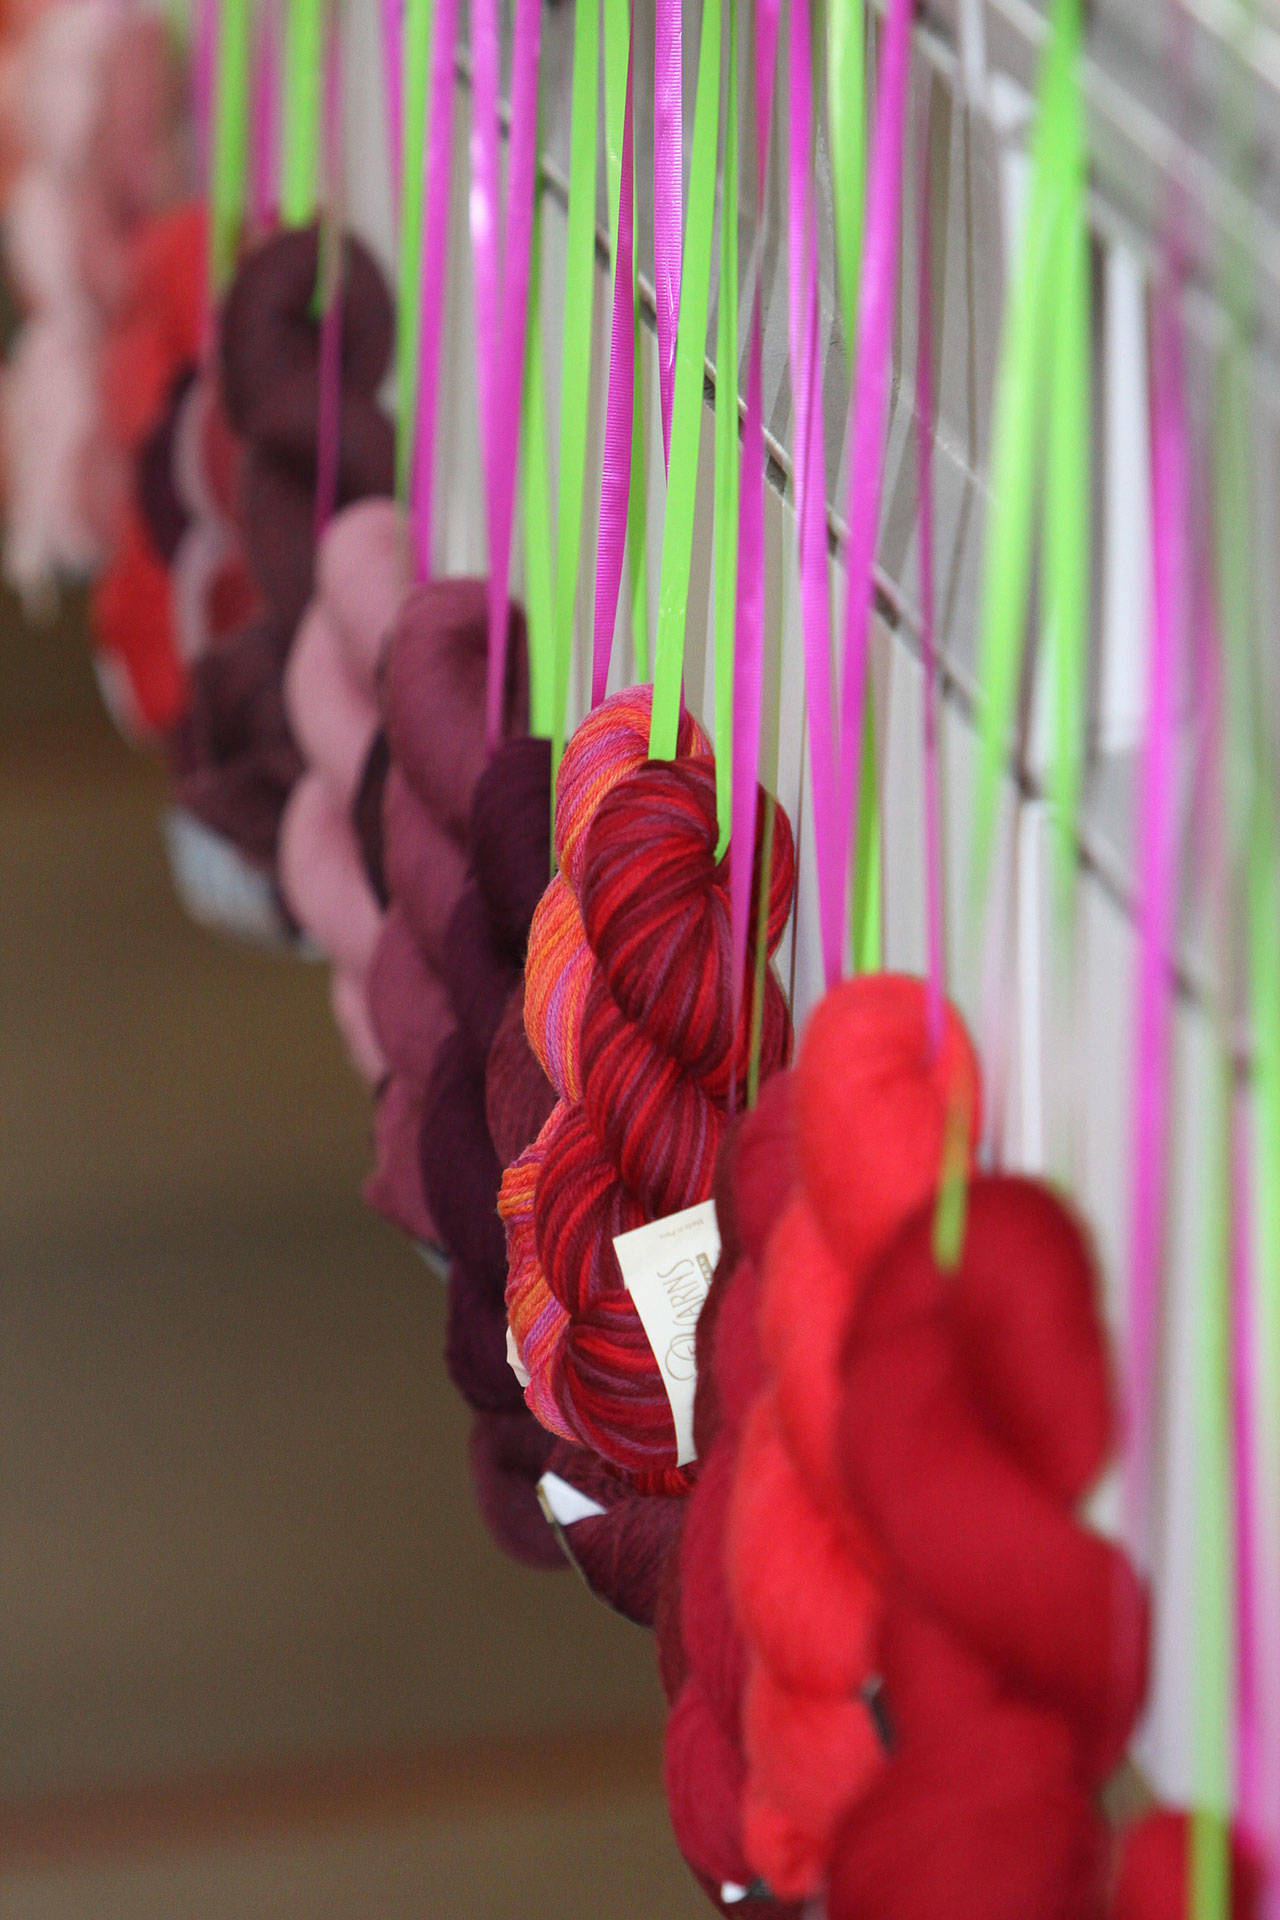 On Sunday, skeins of yarn are hung around the Marketplace and dropped in a “yarn drop.” Steve Schneider/Vogue Knitting LIVE